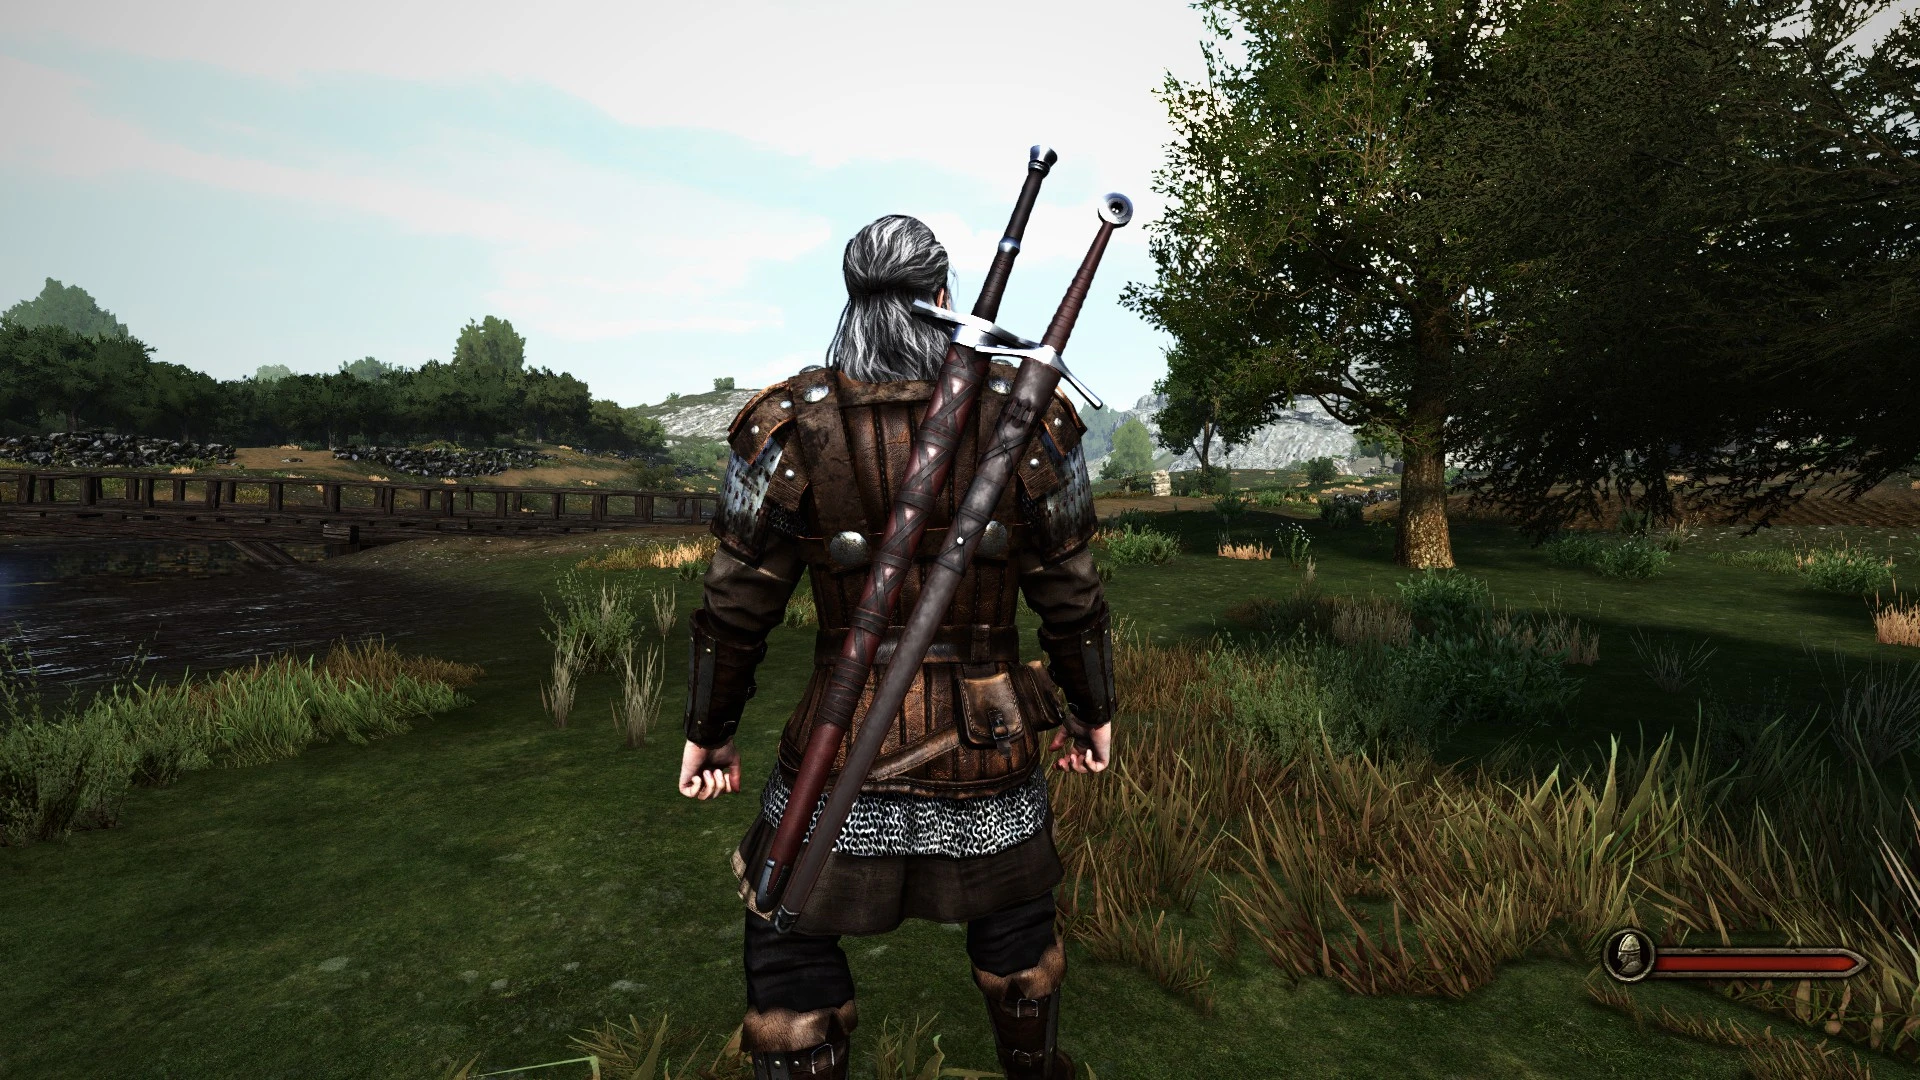 mount and blade bannerlord multiplayer campaign mod